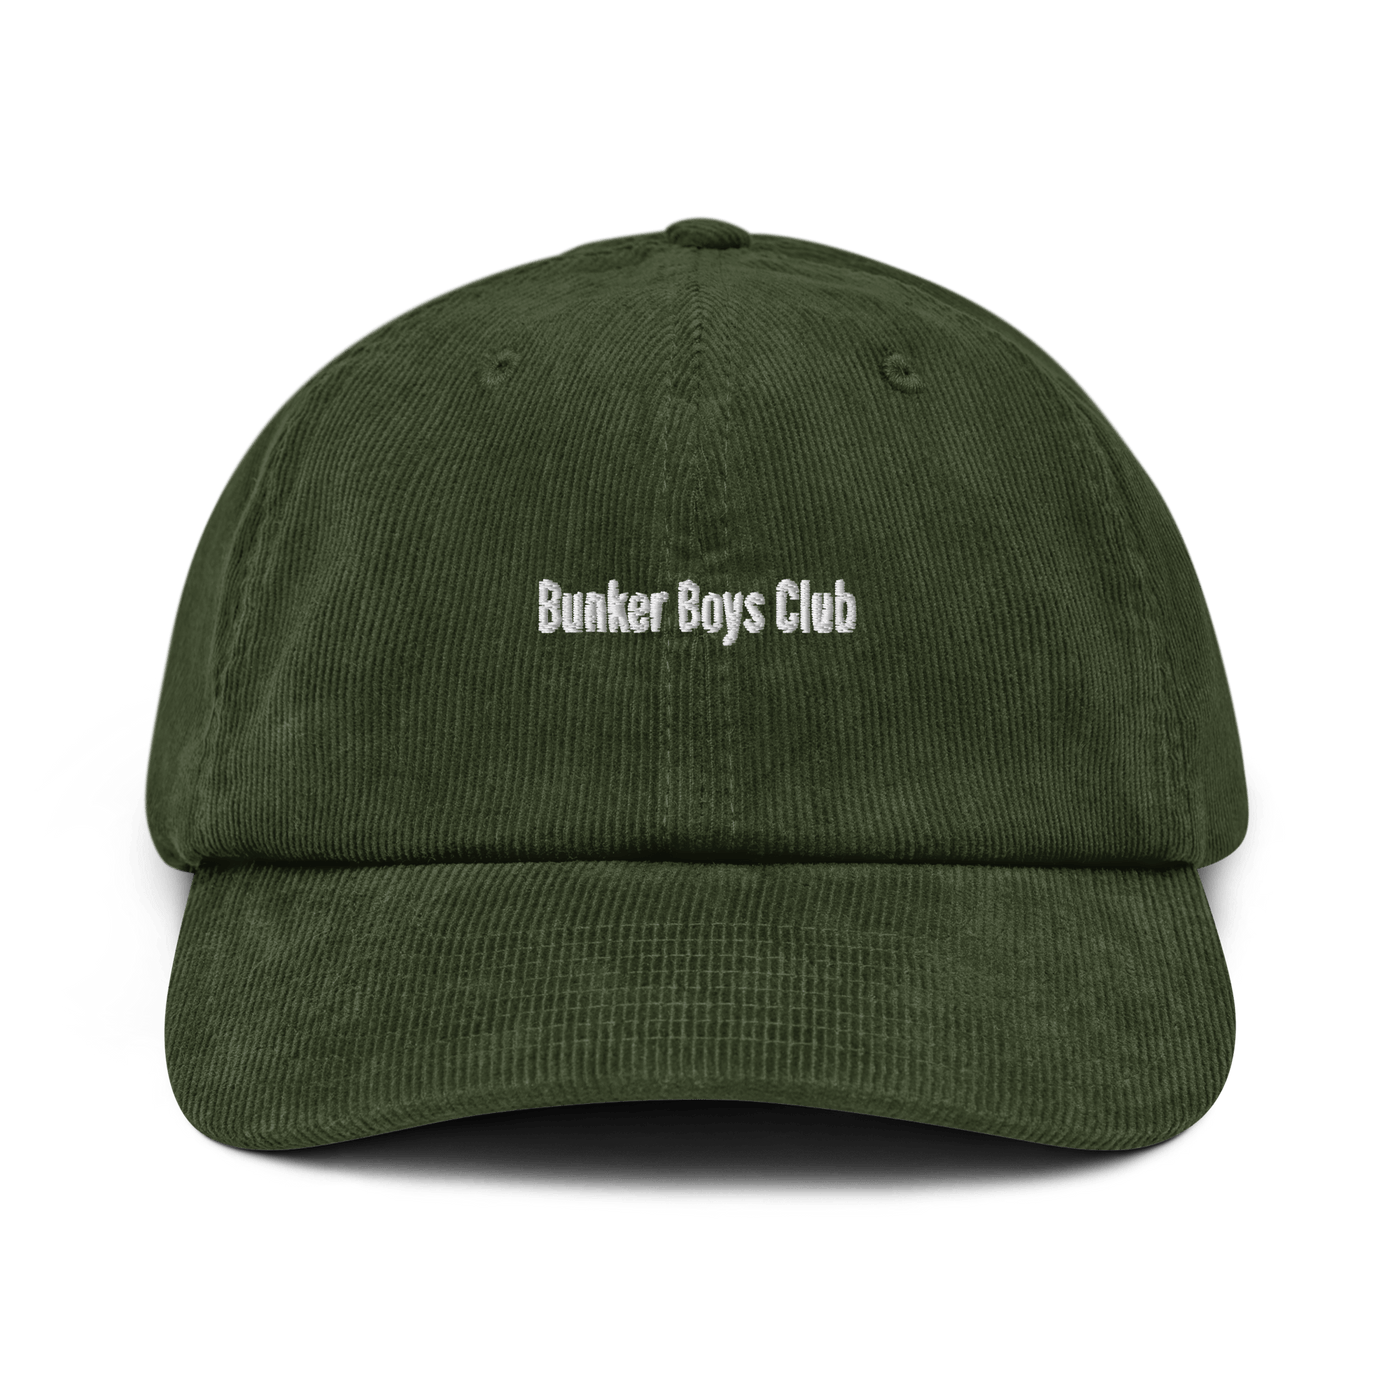 Bunker Boys Club Corduroy hat - Dark Olive - - Just Another Cap Store